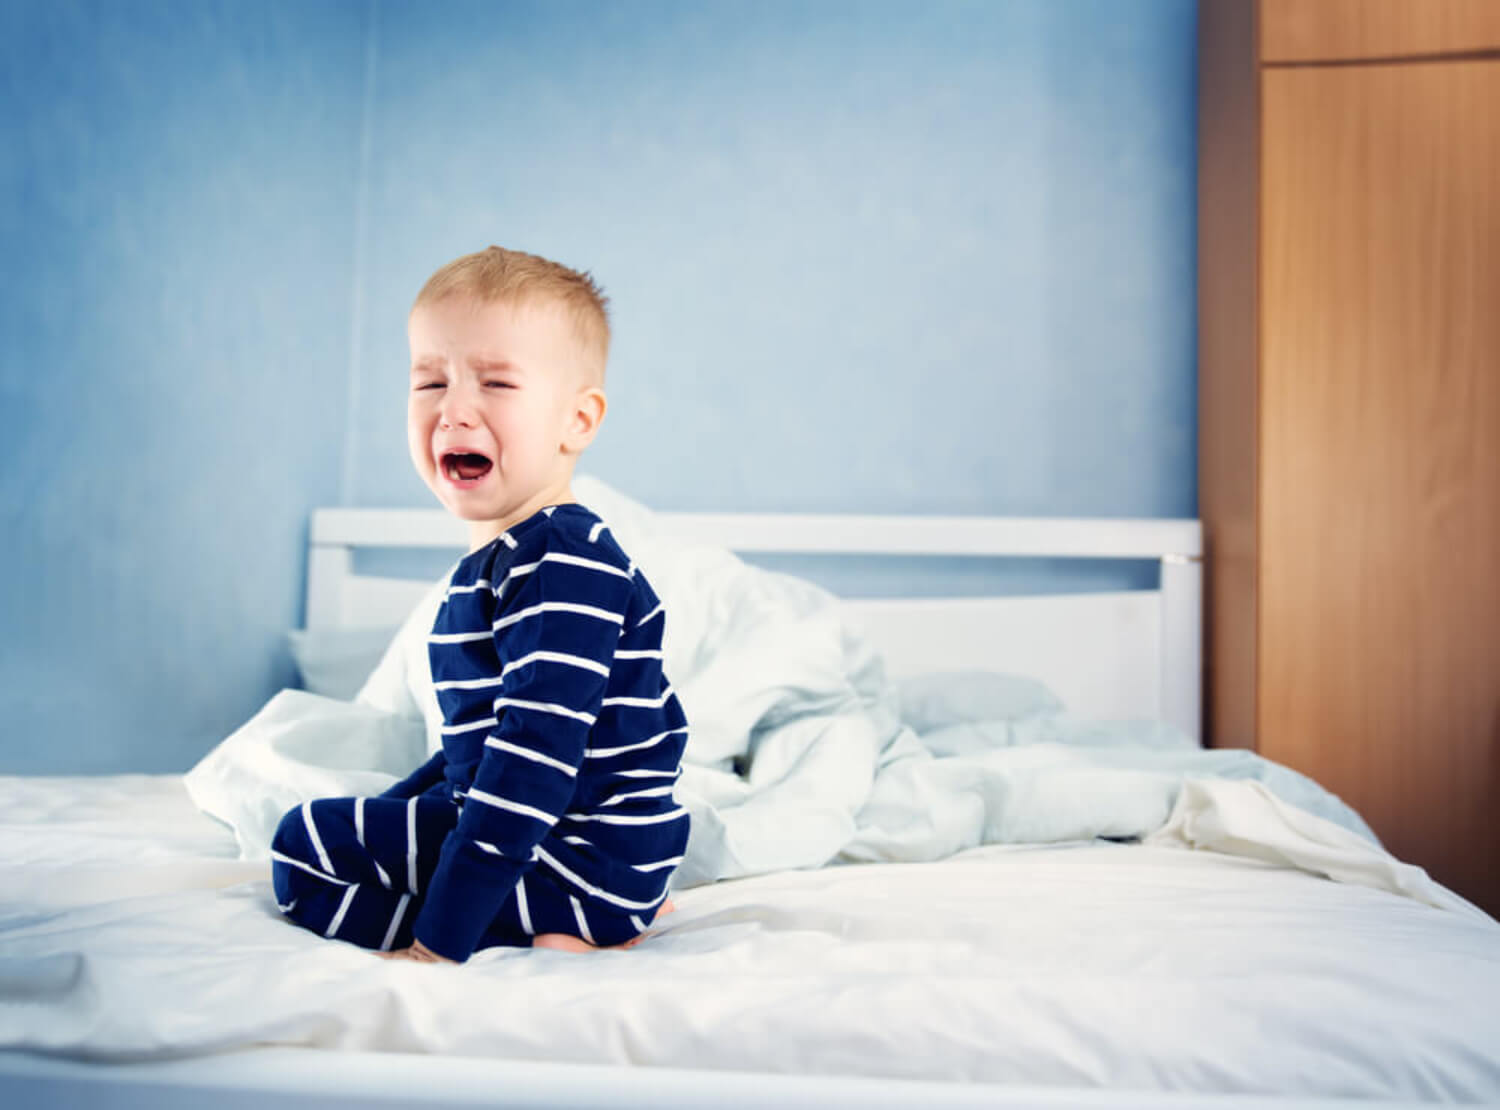 A toddler boy sitting on his bed crying.